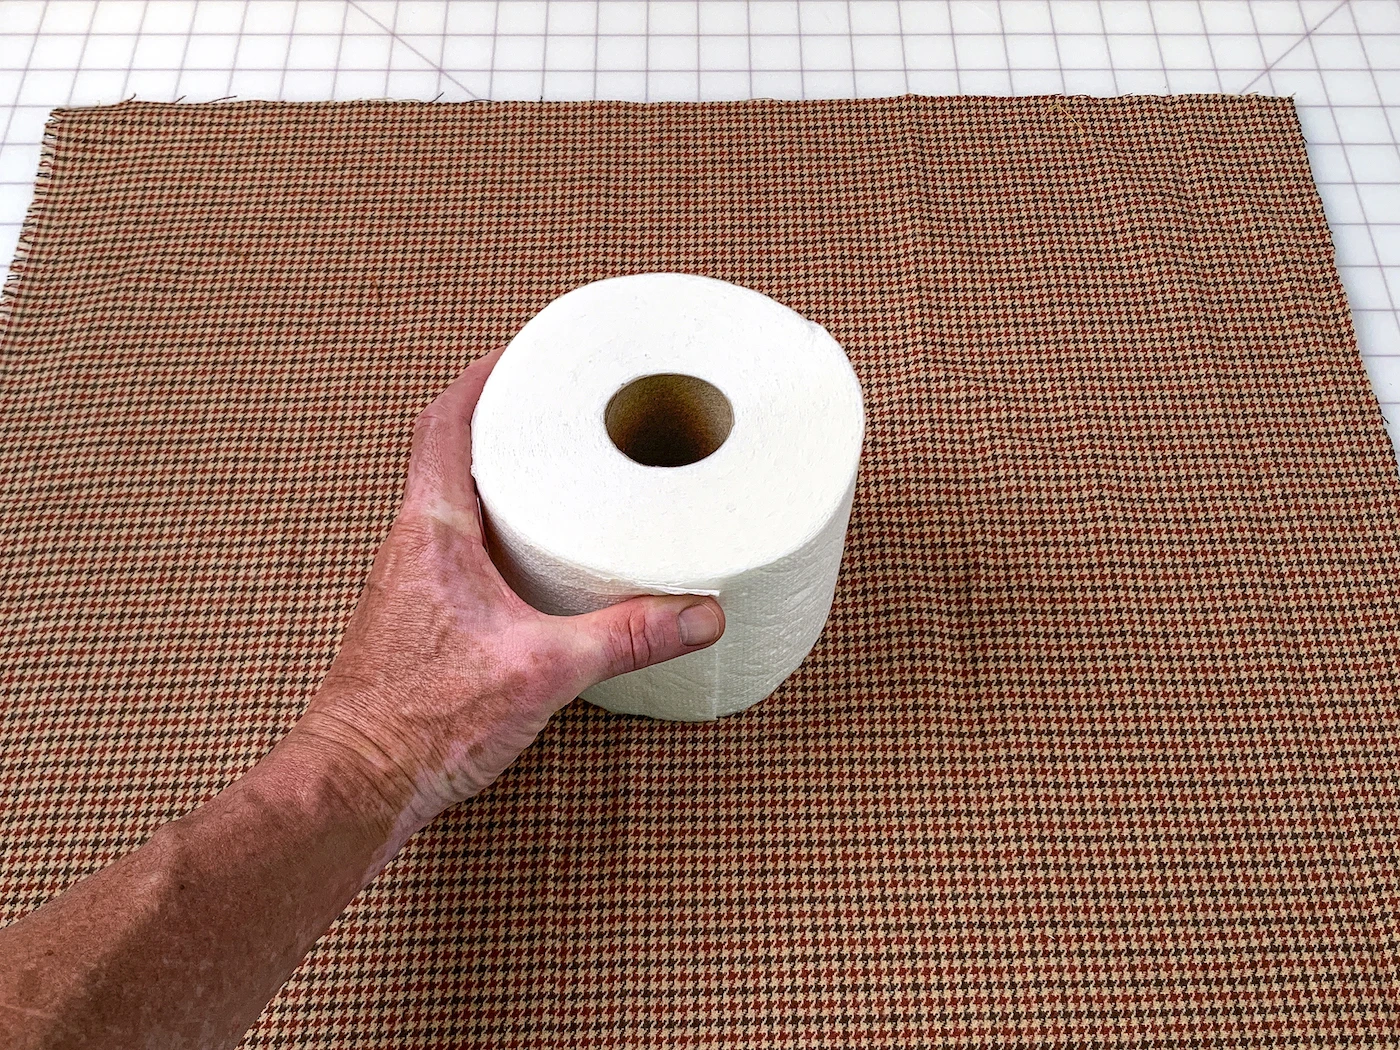 Roll of toilet paper sitting in the center of a piece of fabric